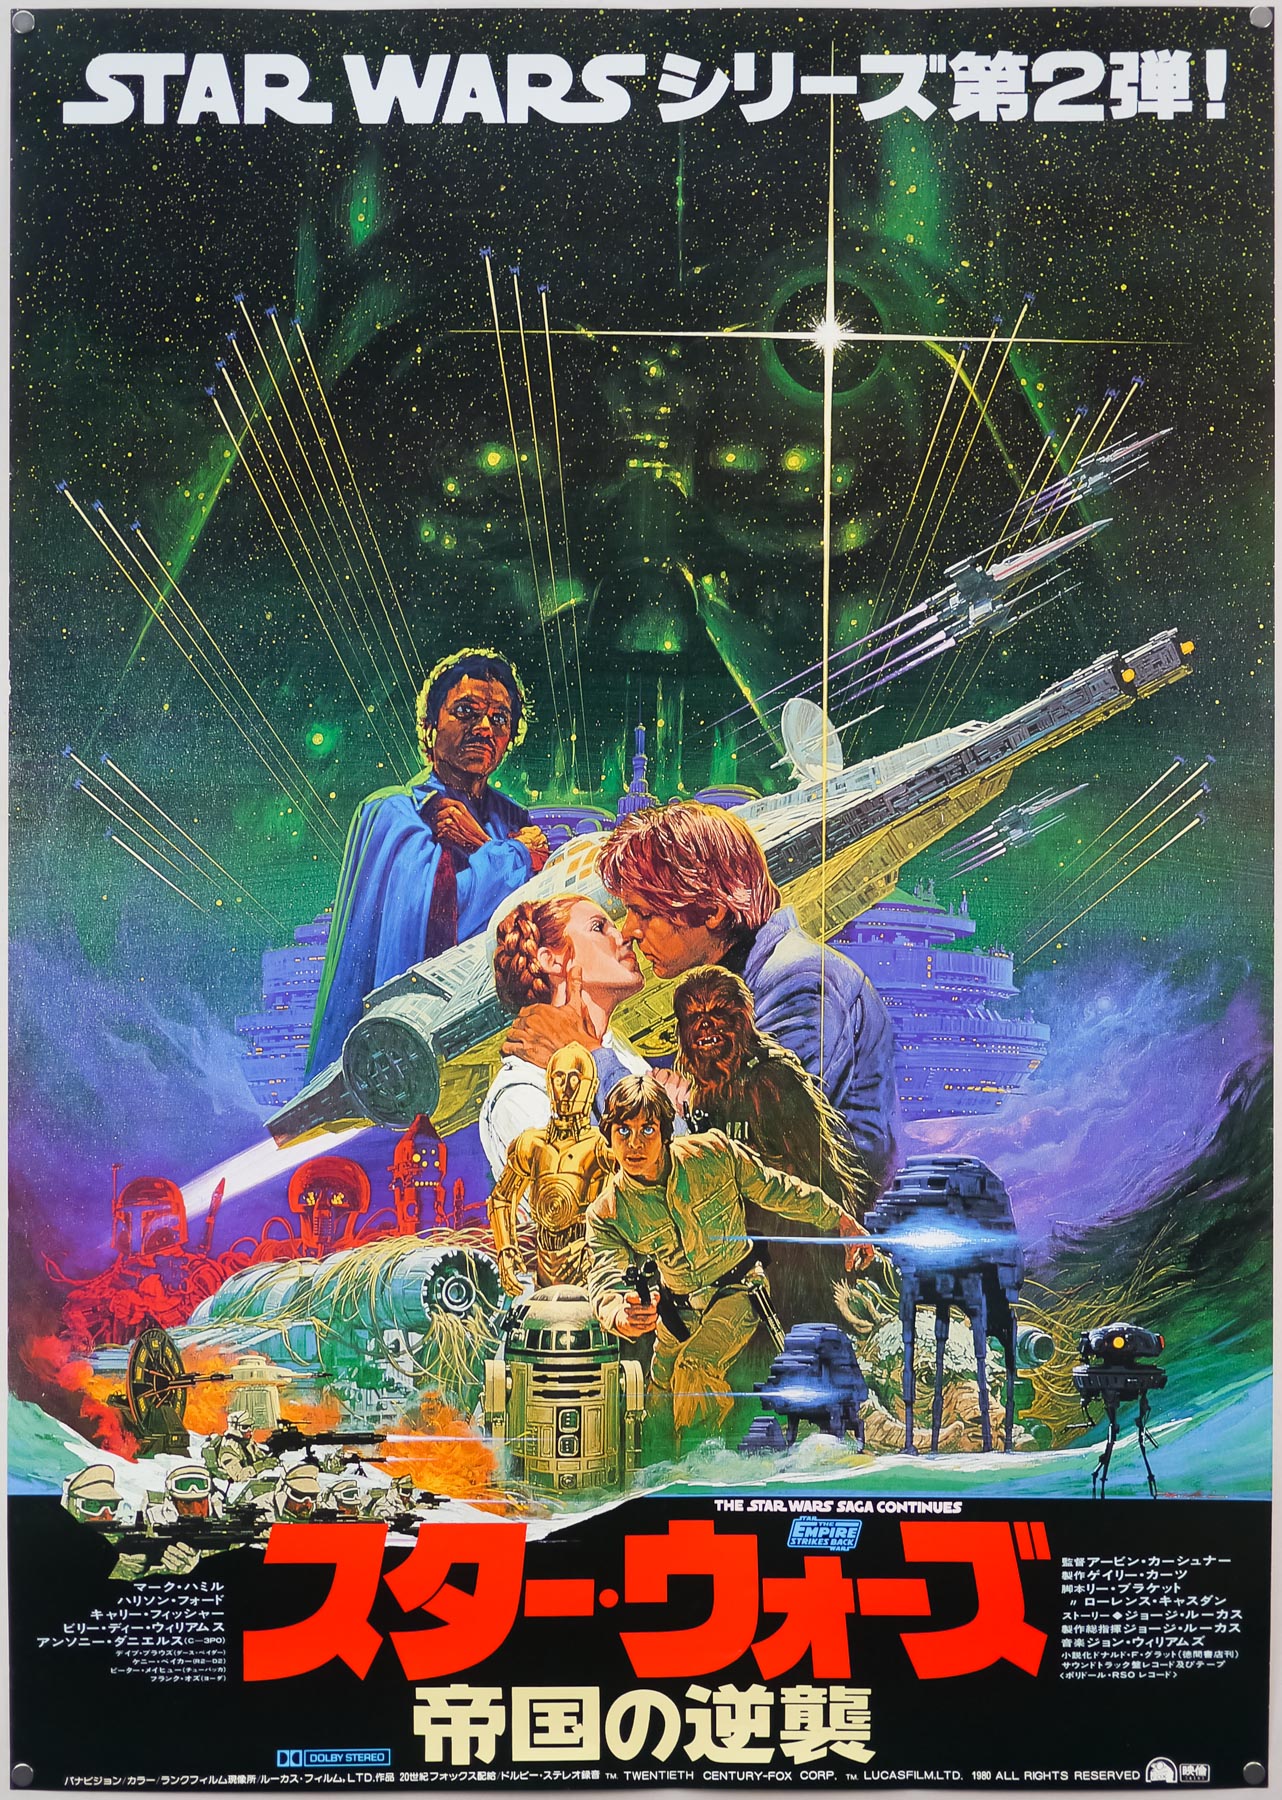 The gorgeous Japanese B1 poster for The Empire Strikes Back, painted by Ohrai. This poster led to many more film-related commissions.